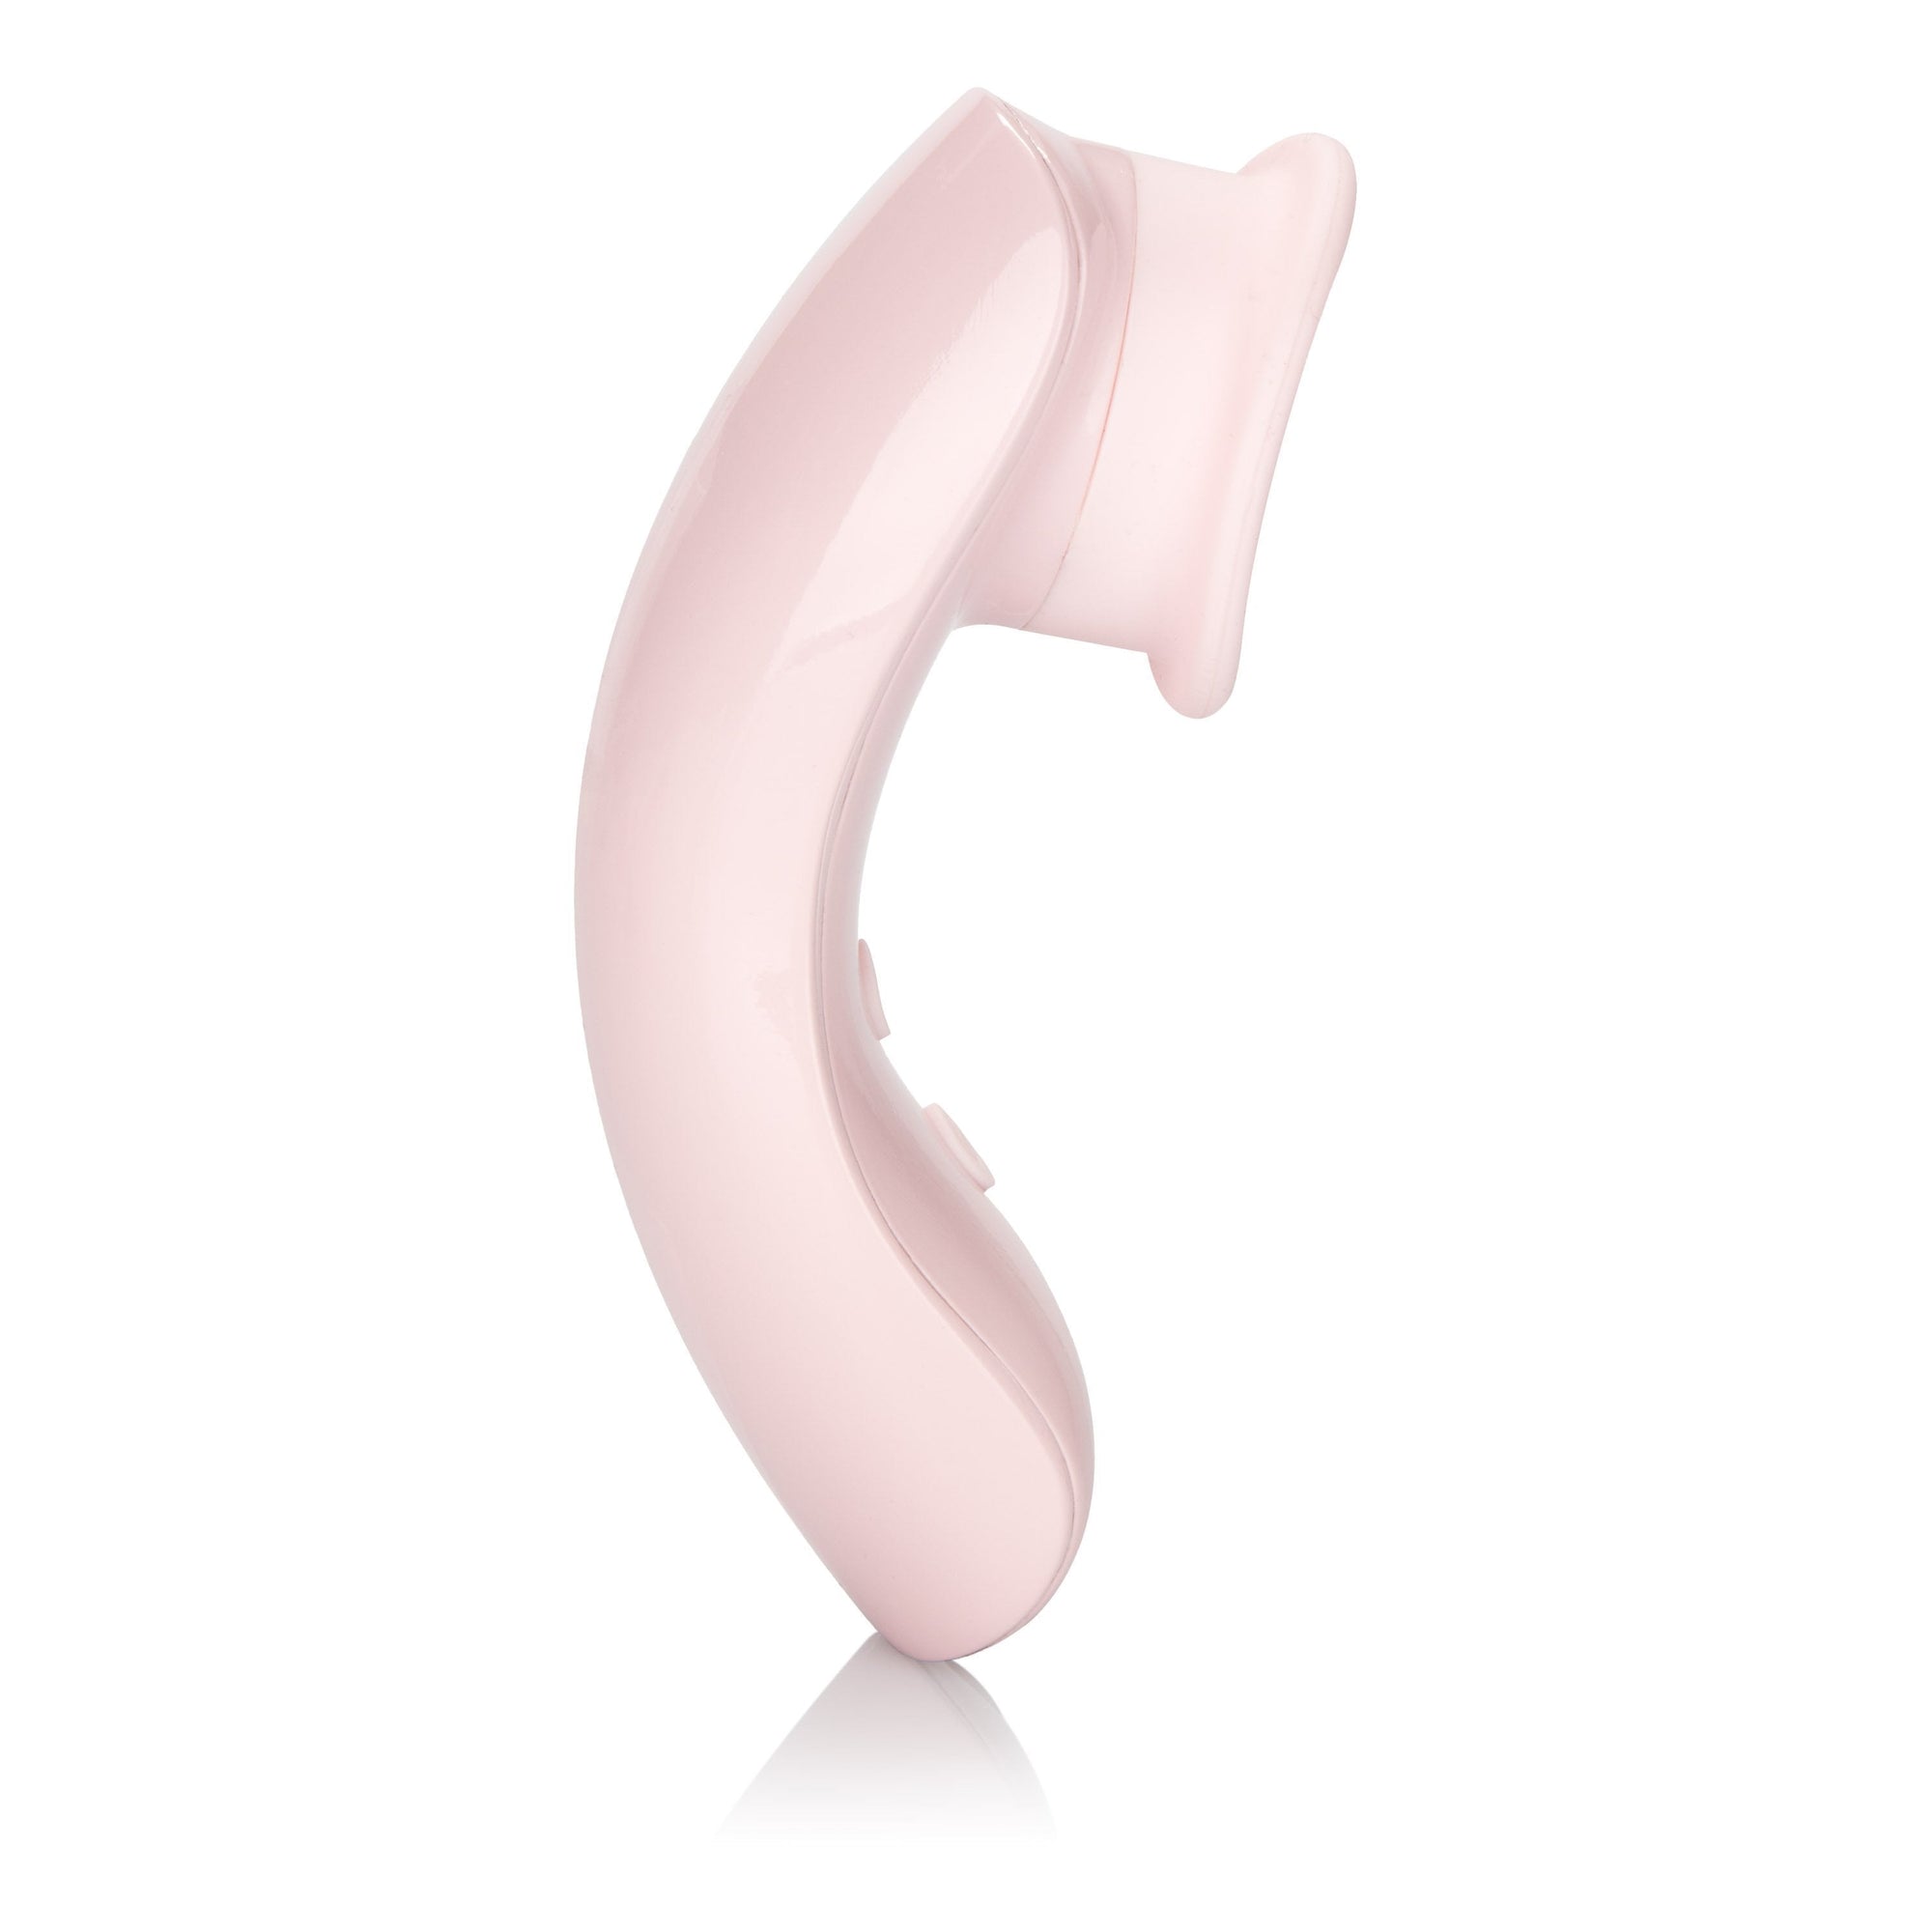 California Exotics - Inspire Flickering Intimate Arouser Clit Massager (Pink) -  Clit Massager (Vibration) Rechargeable  Durio.sg